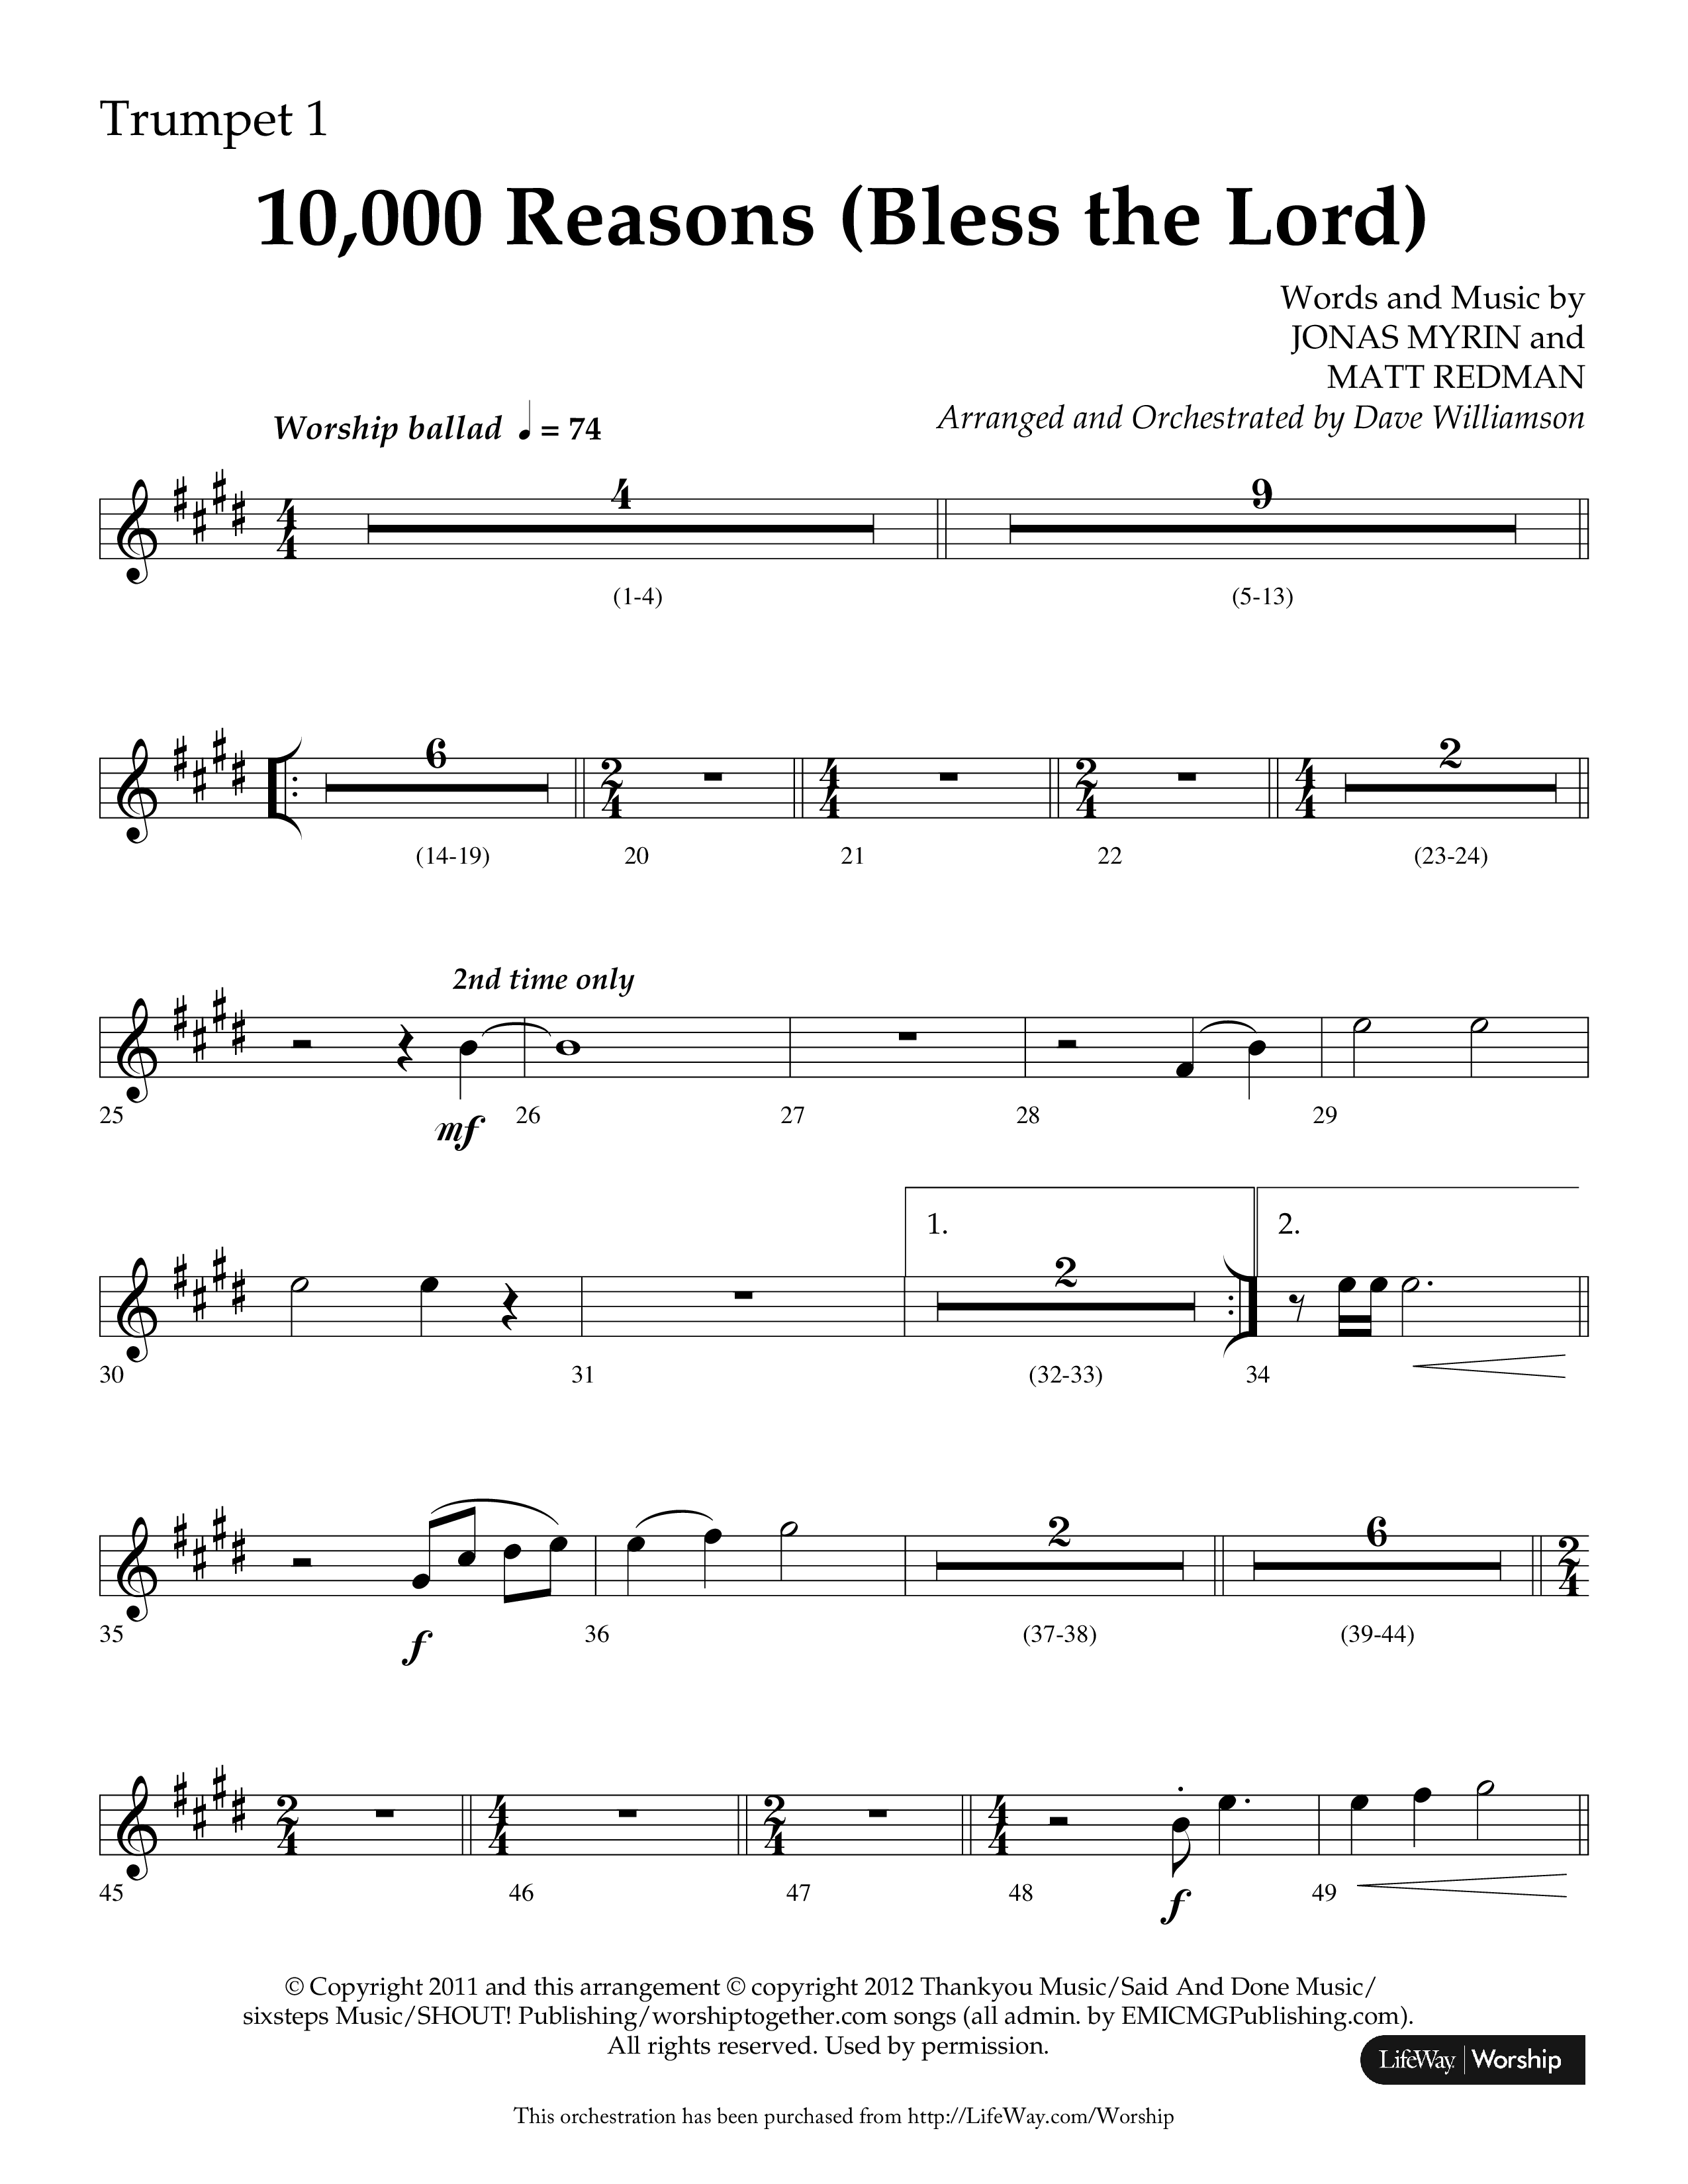 10,000 Reasons (Bless The Lord) (Choral Anthem SATB) Trumpet 1 (Lifeway Choral / Arr. Dave Williamson)